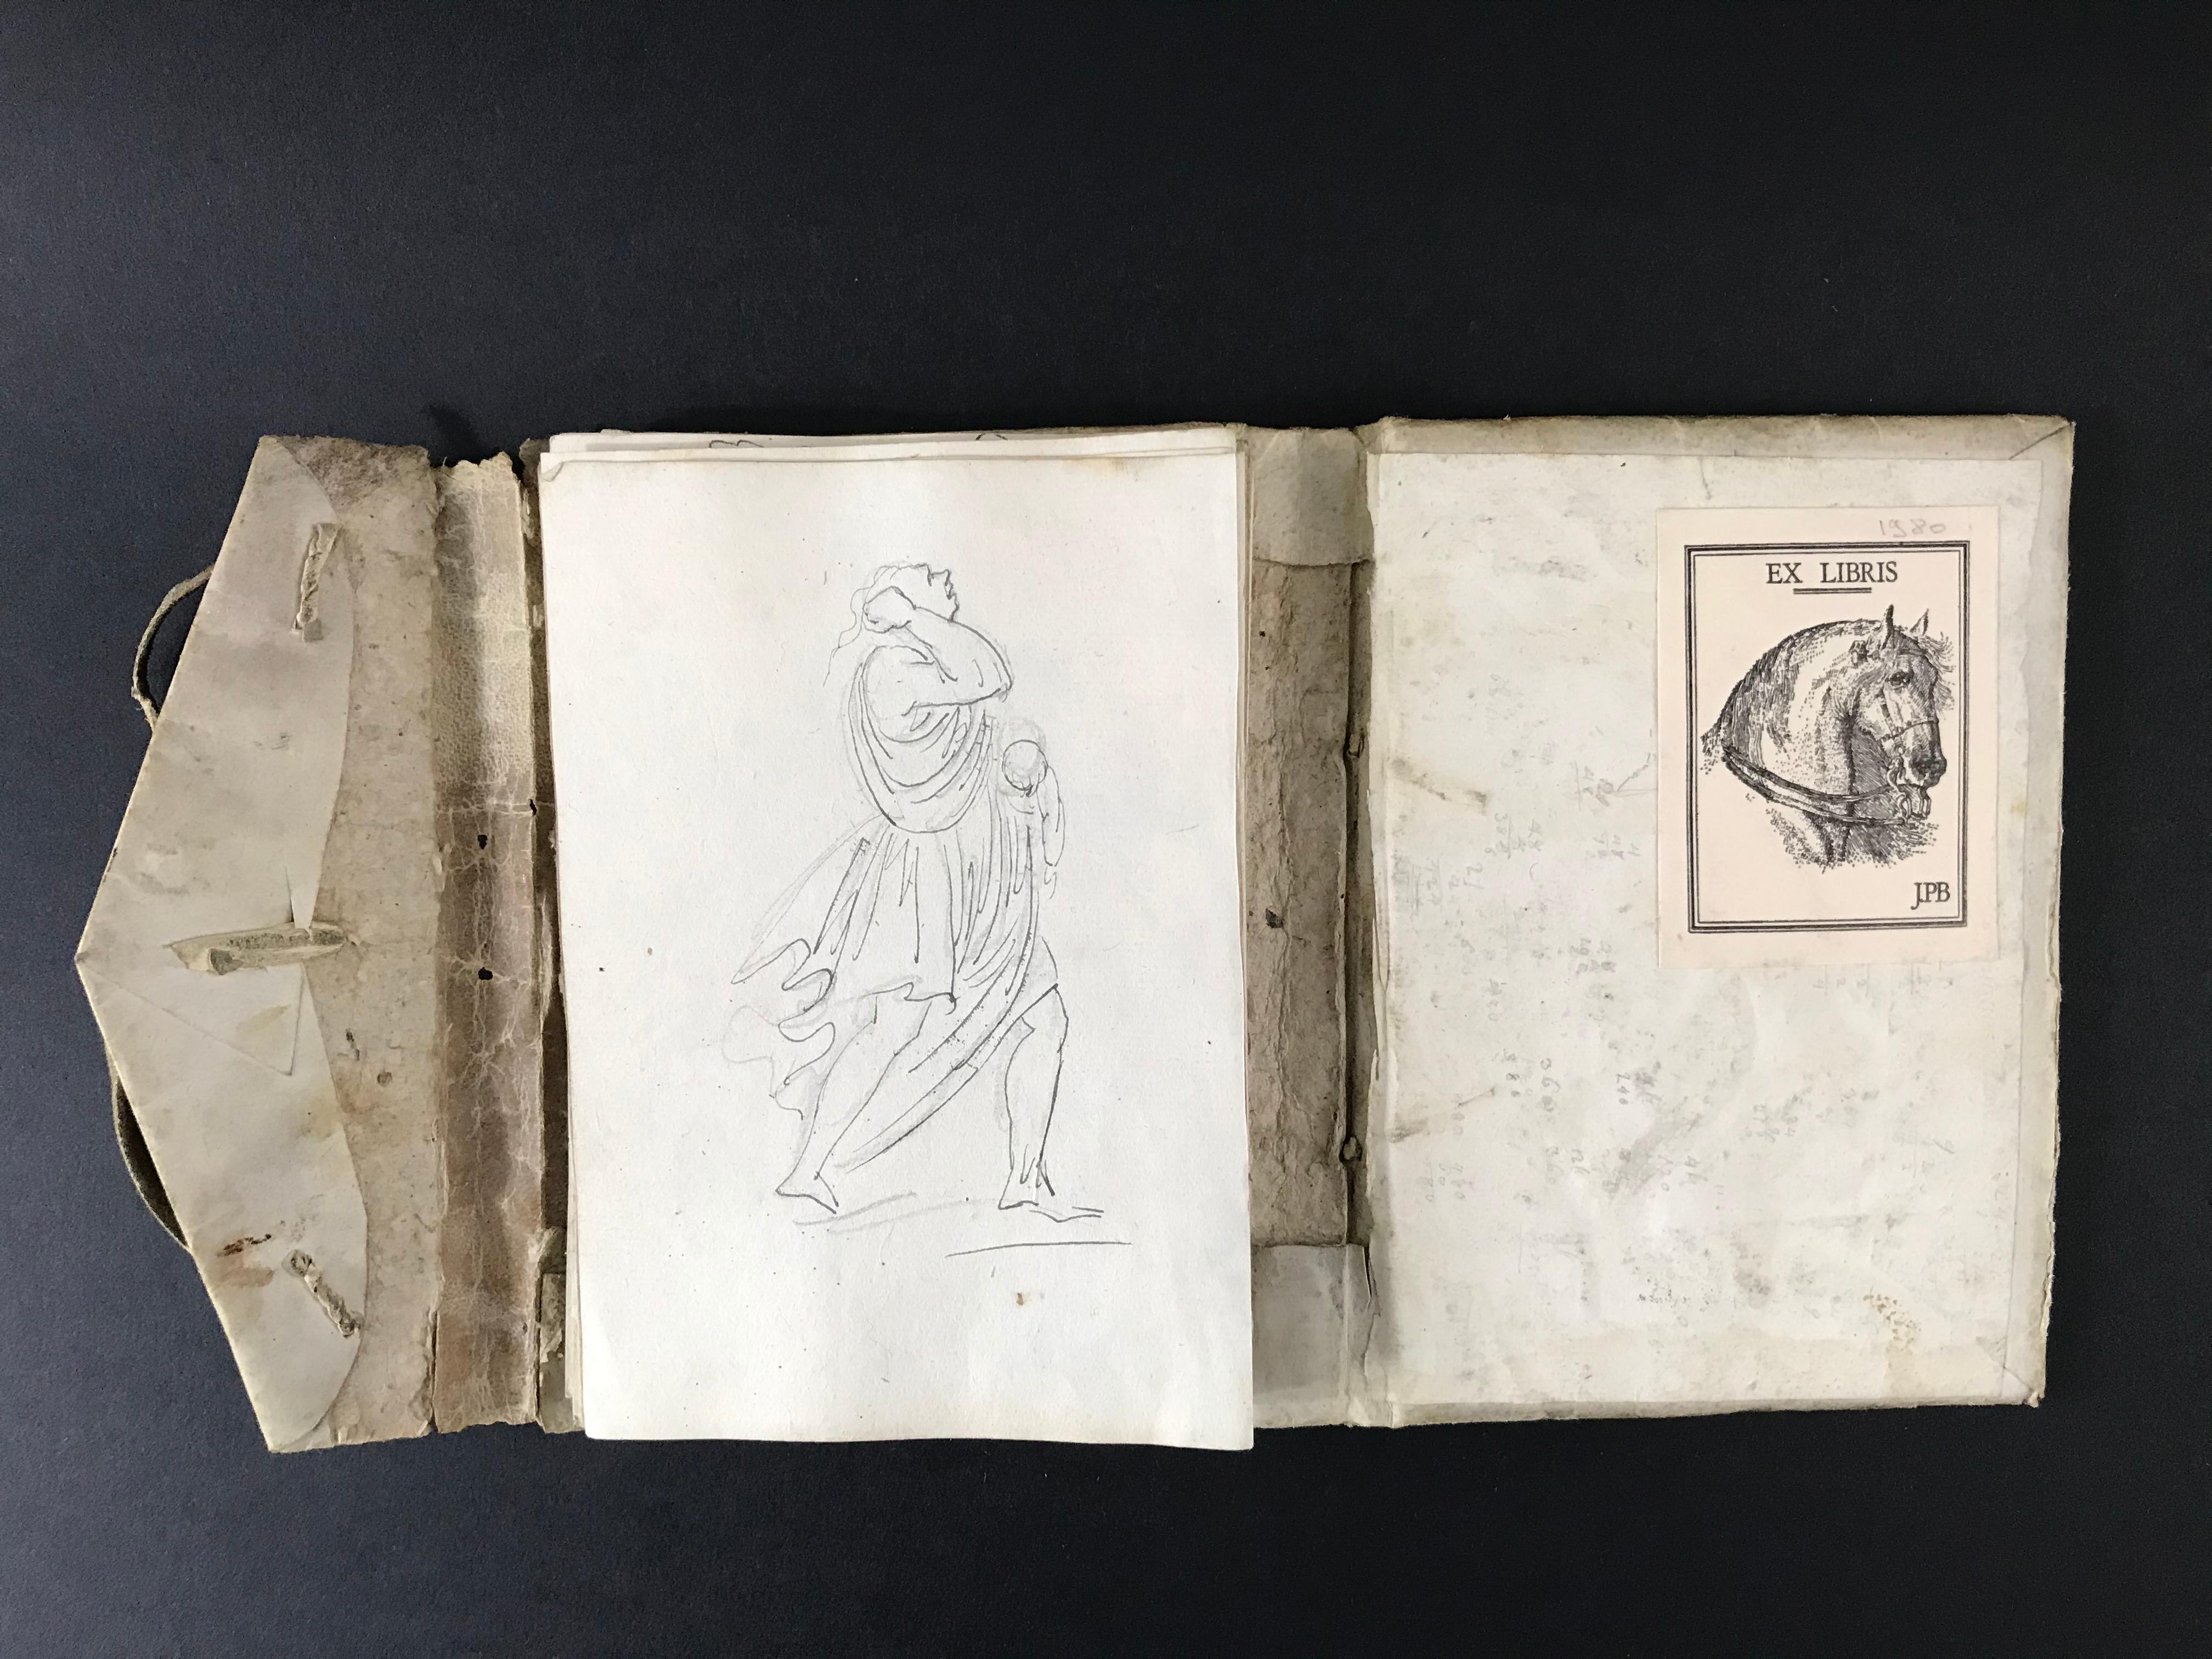 Sketchbook, gathering a set of 87 drawings made in Italy at the end of the 18th century. The booklet covered with parchment and closing with a cord brings together a set of studies of characters, architectural drawings and decorative elements.